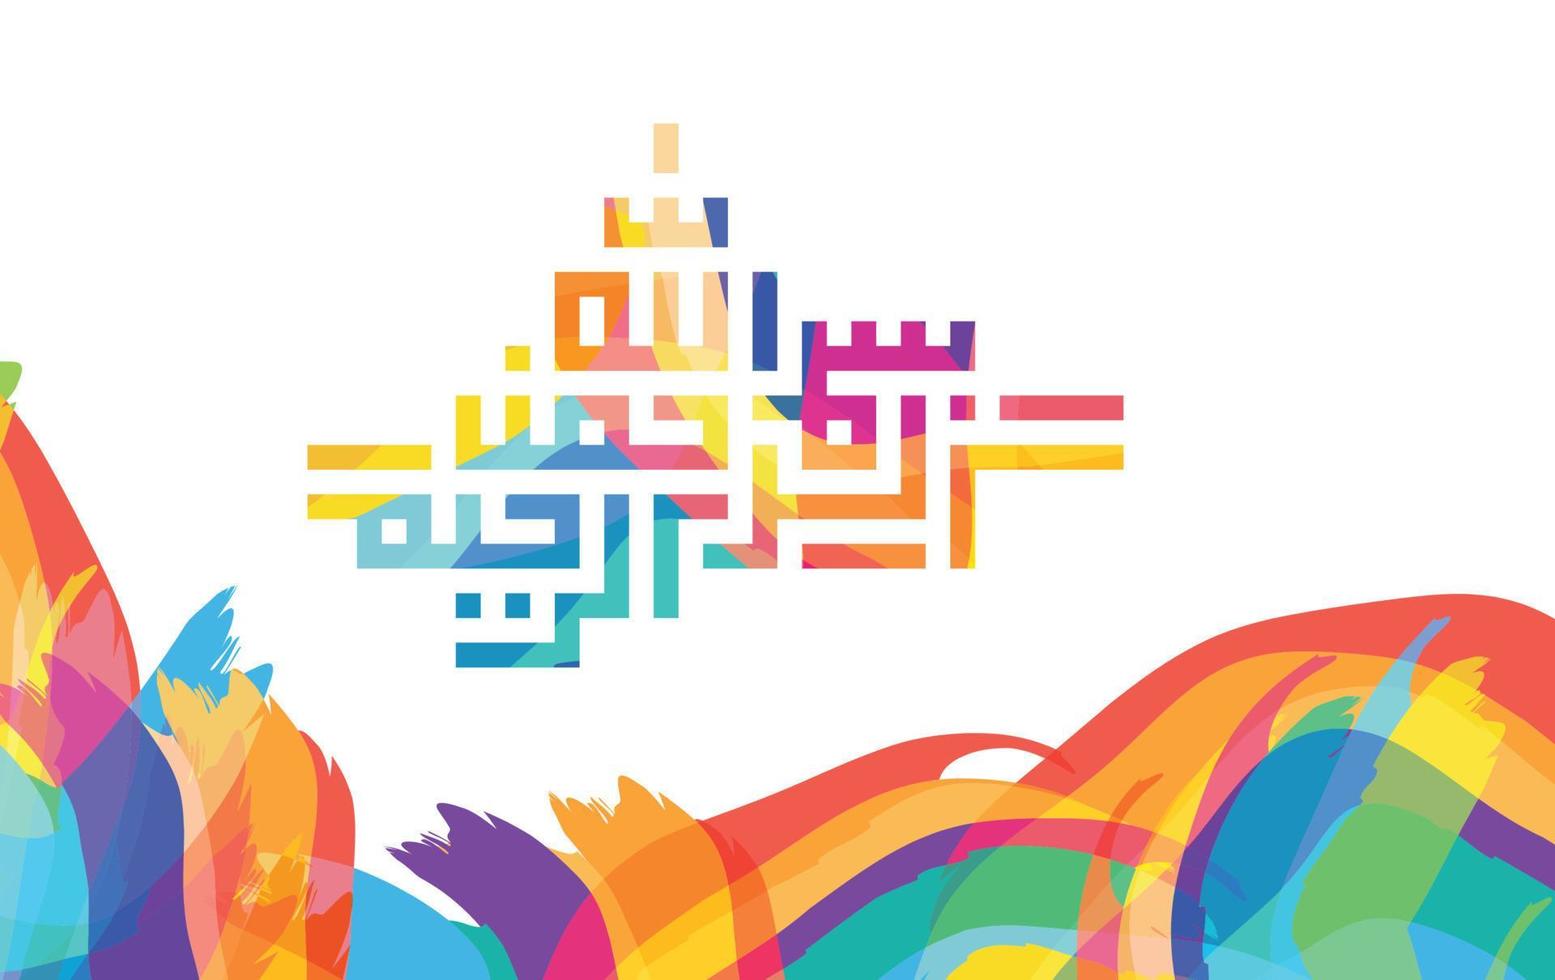 Arabic Calligraphy of Bismillah, the first verse of Quran, translated, In the name of God, the merciful, the compassionate, with colorful color vector